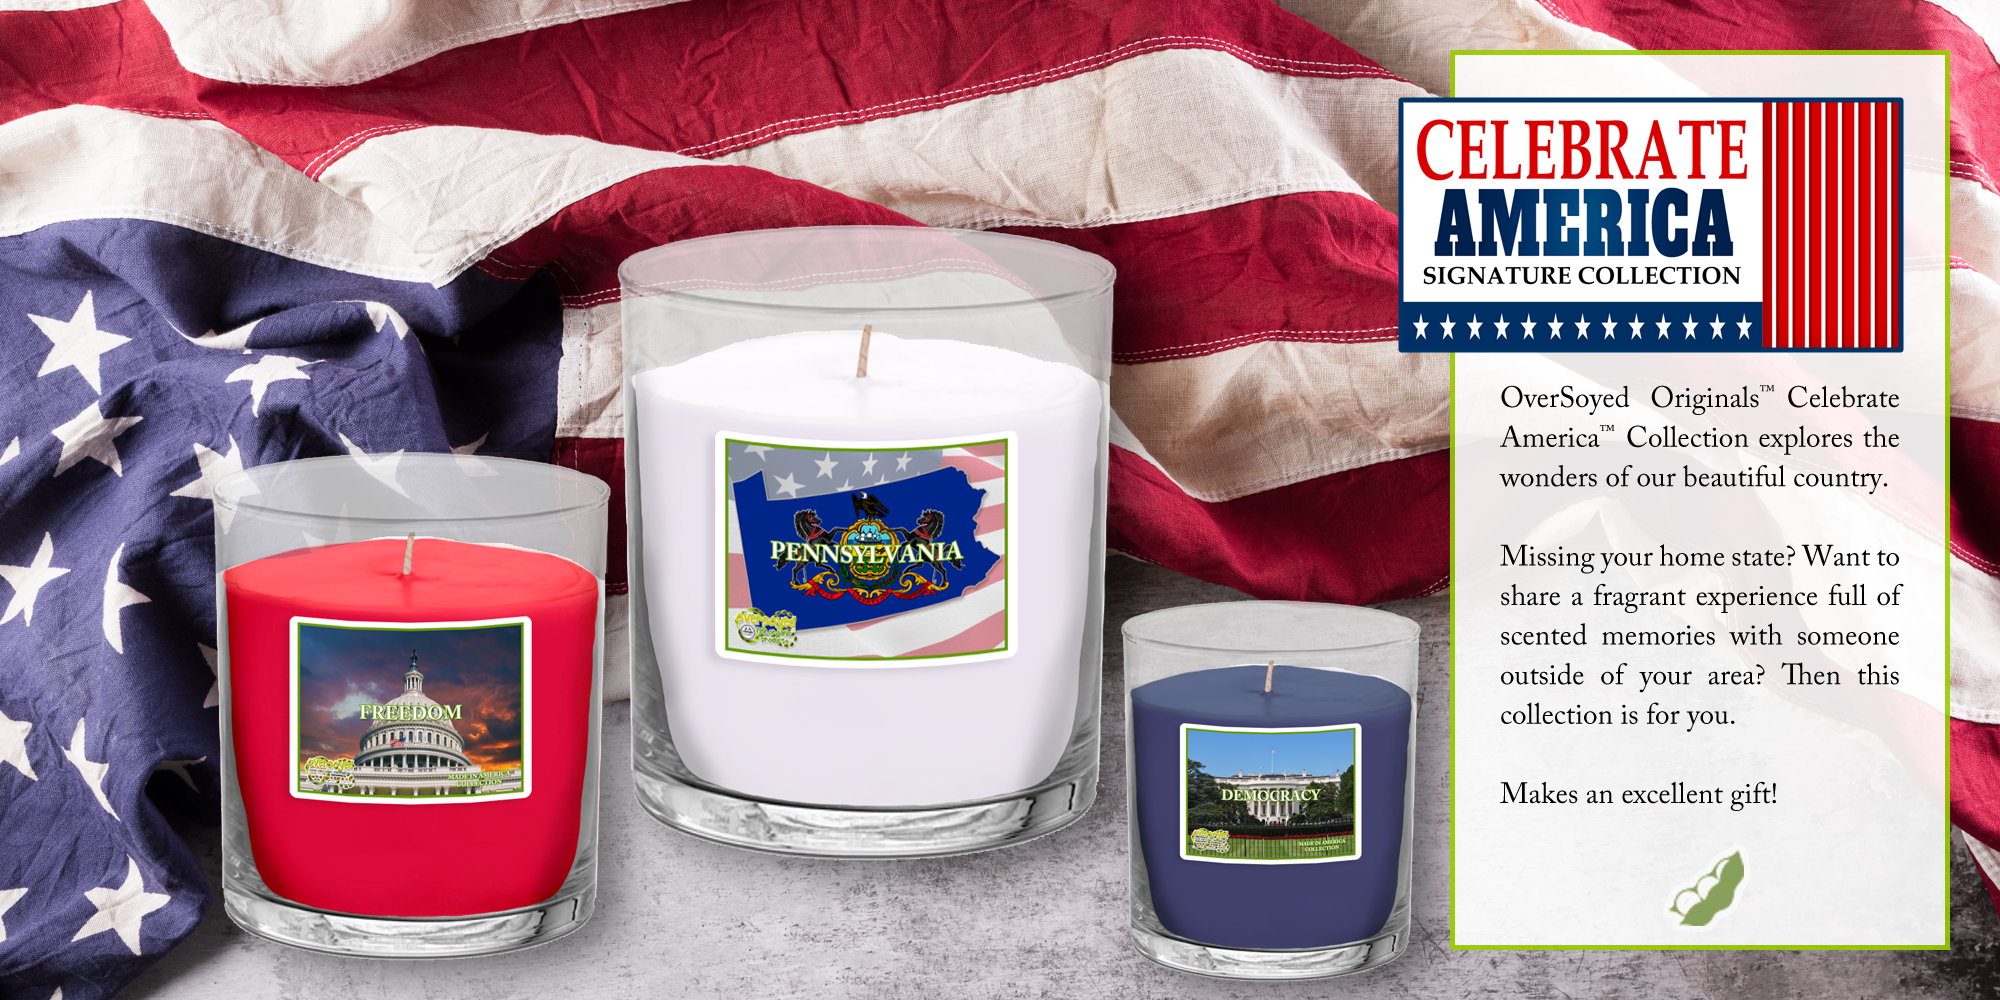 OverSoyed Fine Organic Products - OverSoyed™ Original Celebrate America™ Collection